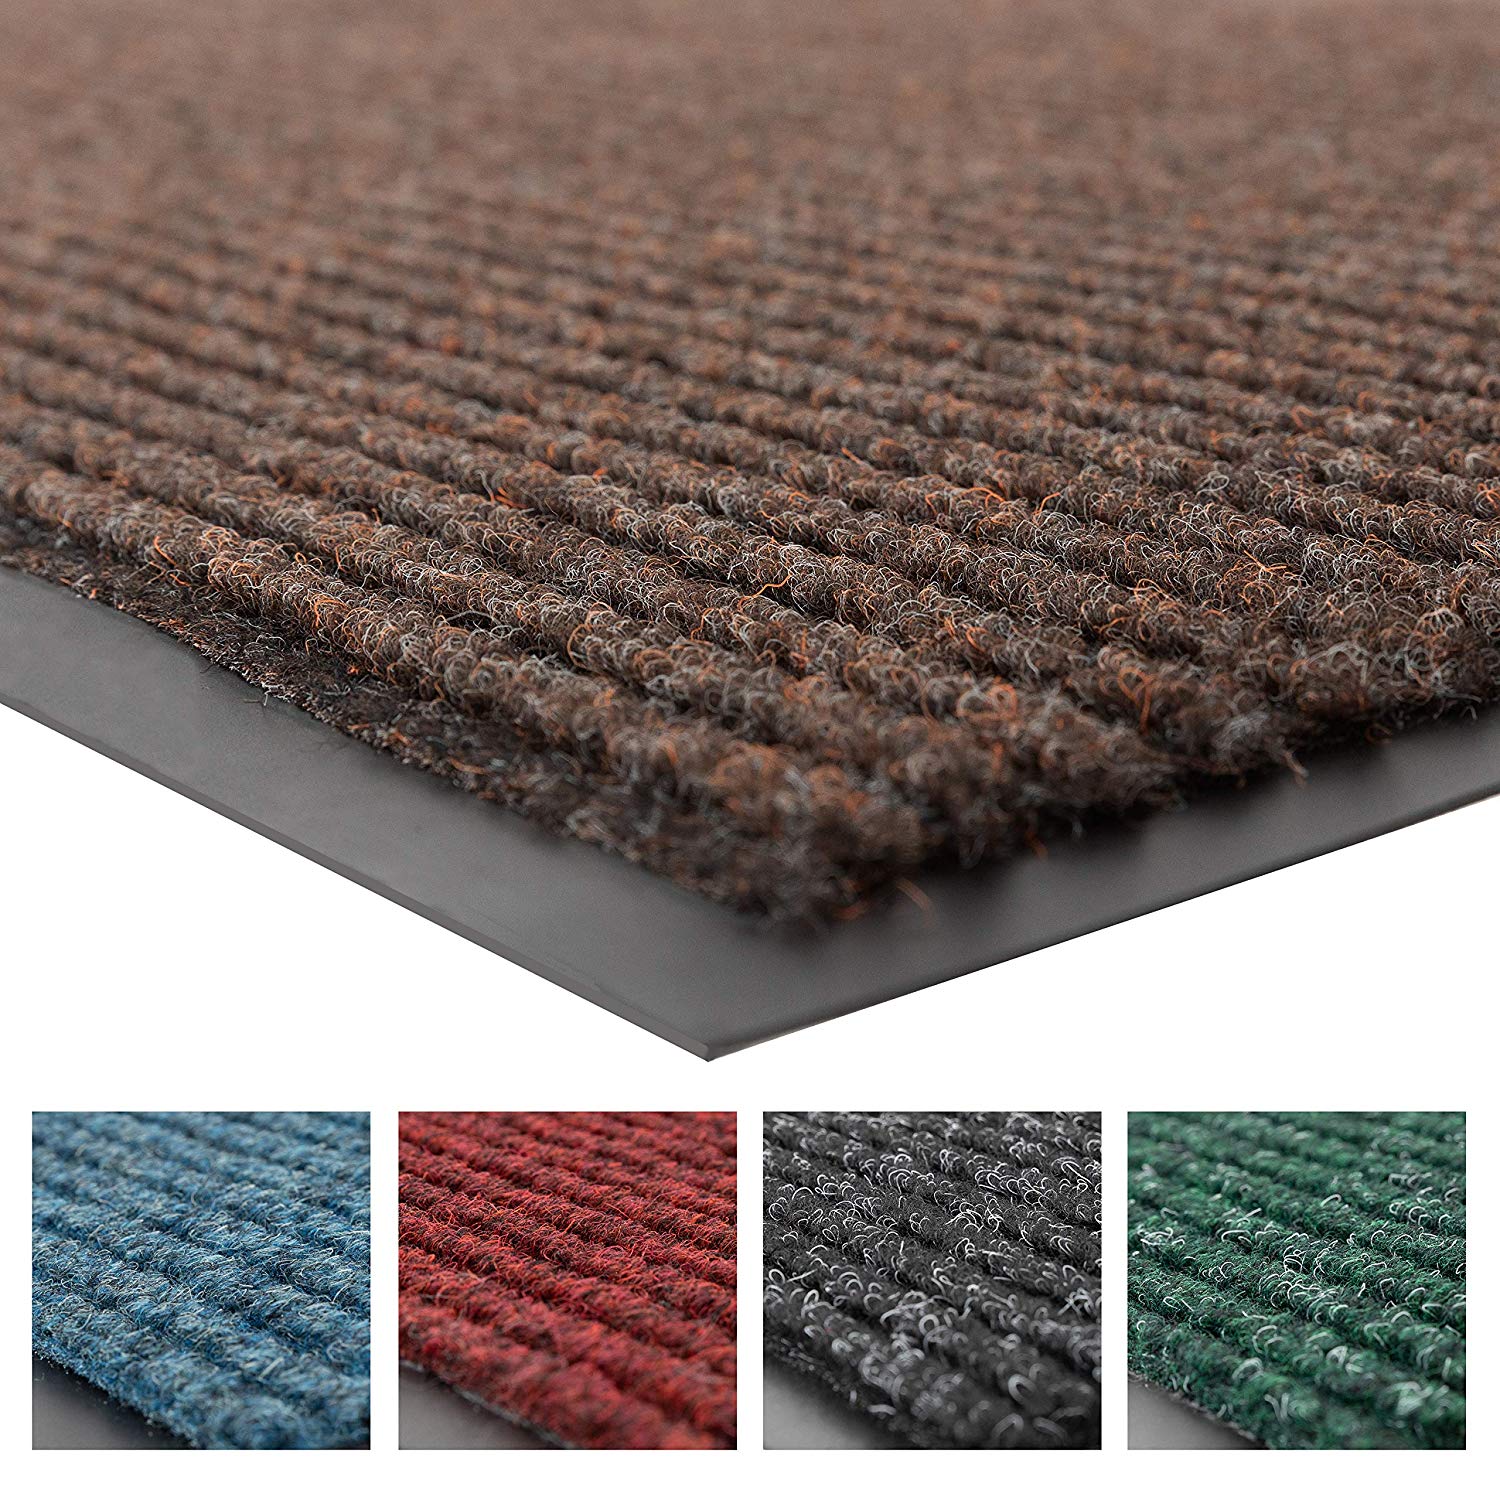 3x5 BRAVICH® Teal Large Non-Slip Heavy Duty Entrance Door Mat Commercial Office Outdoor Dirt Trapper Barrier Indoor Rubber Washable Mats Runner Premium High Qualtiy 90x150cm